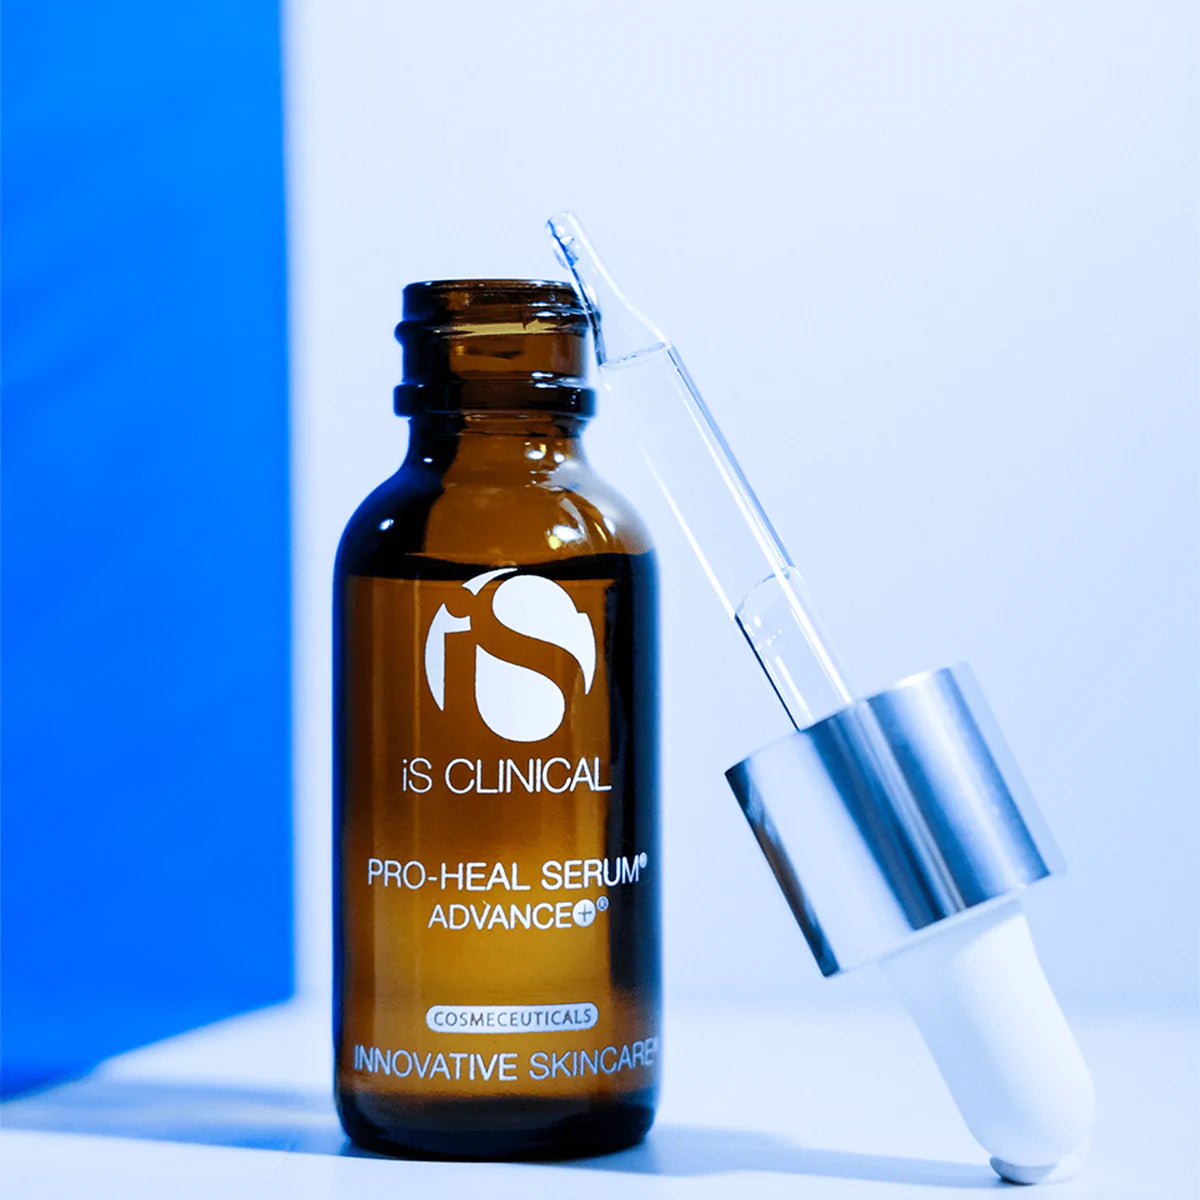 iS CLINICAL - Pro-Heal Serum Advance+